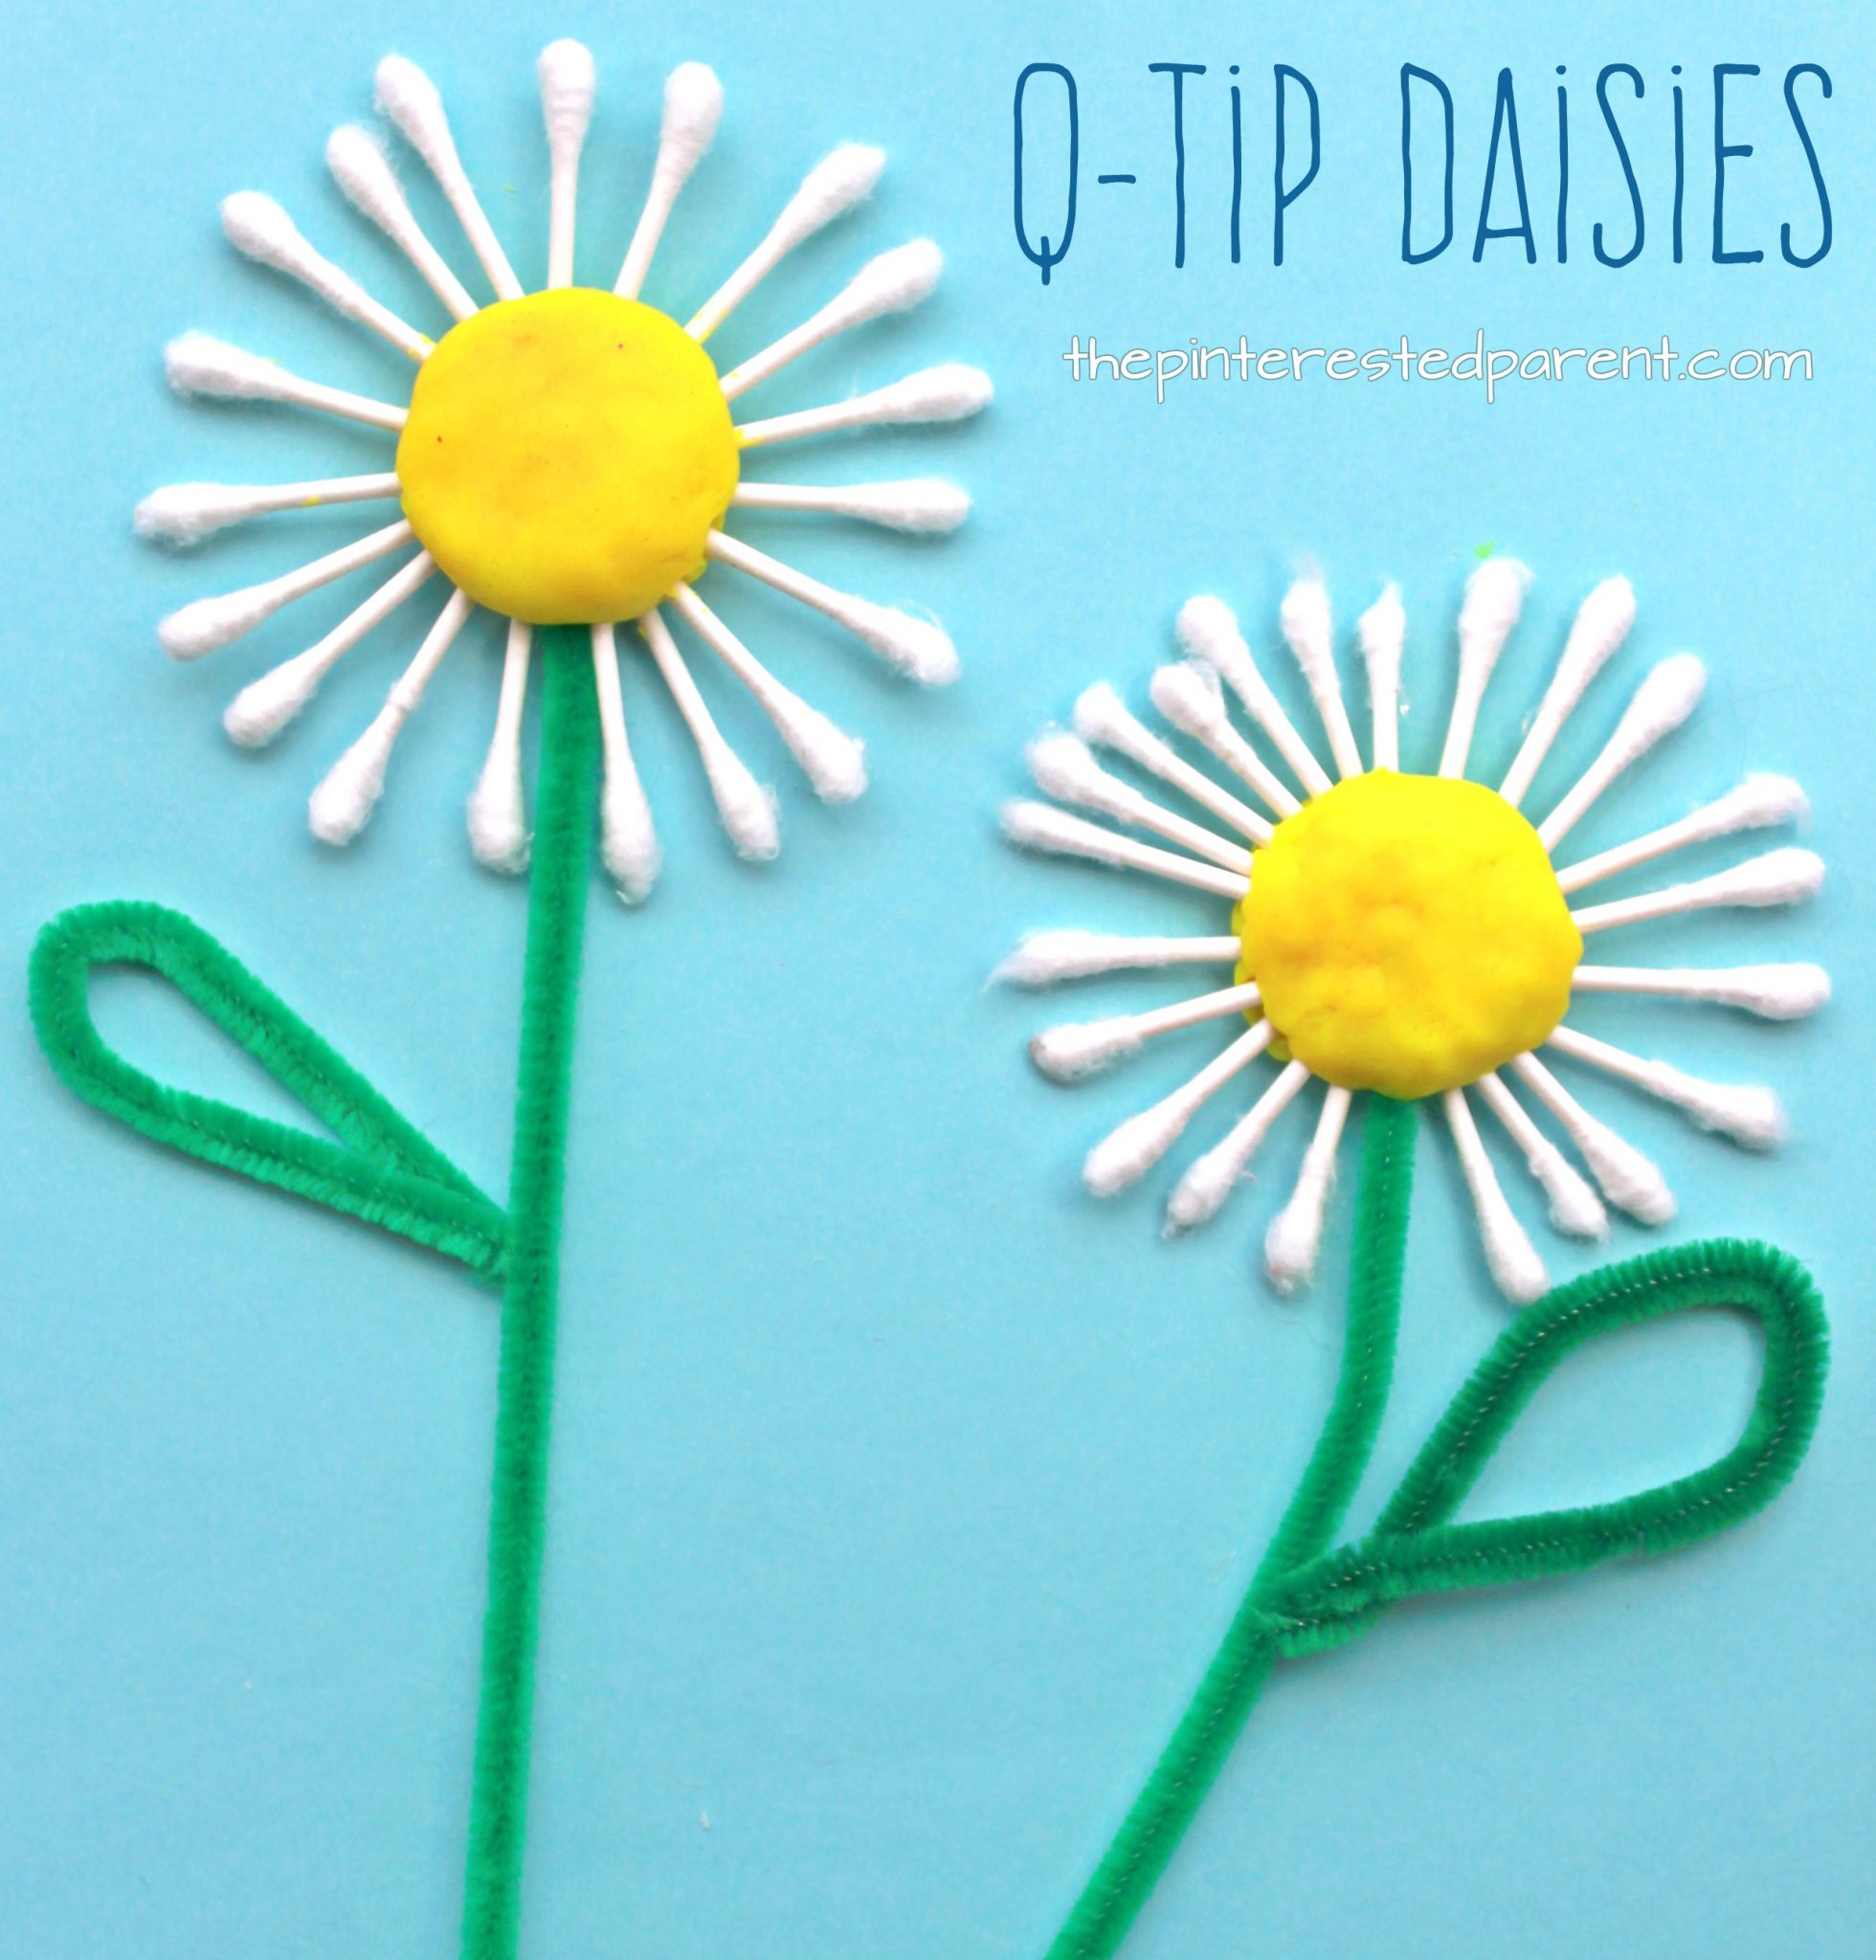 Q-tip Cotton swap daisies. Flower arts and crafts for kids. Great for summer or spring.